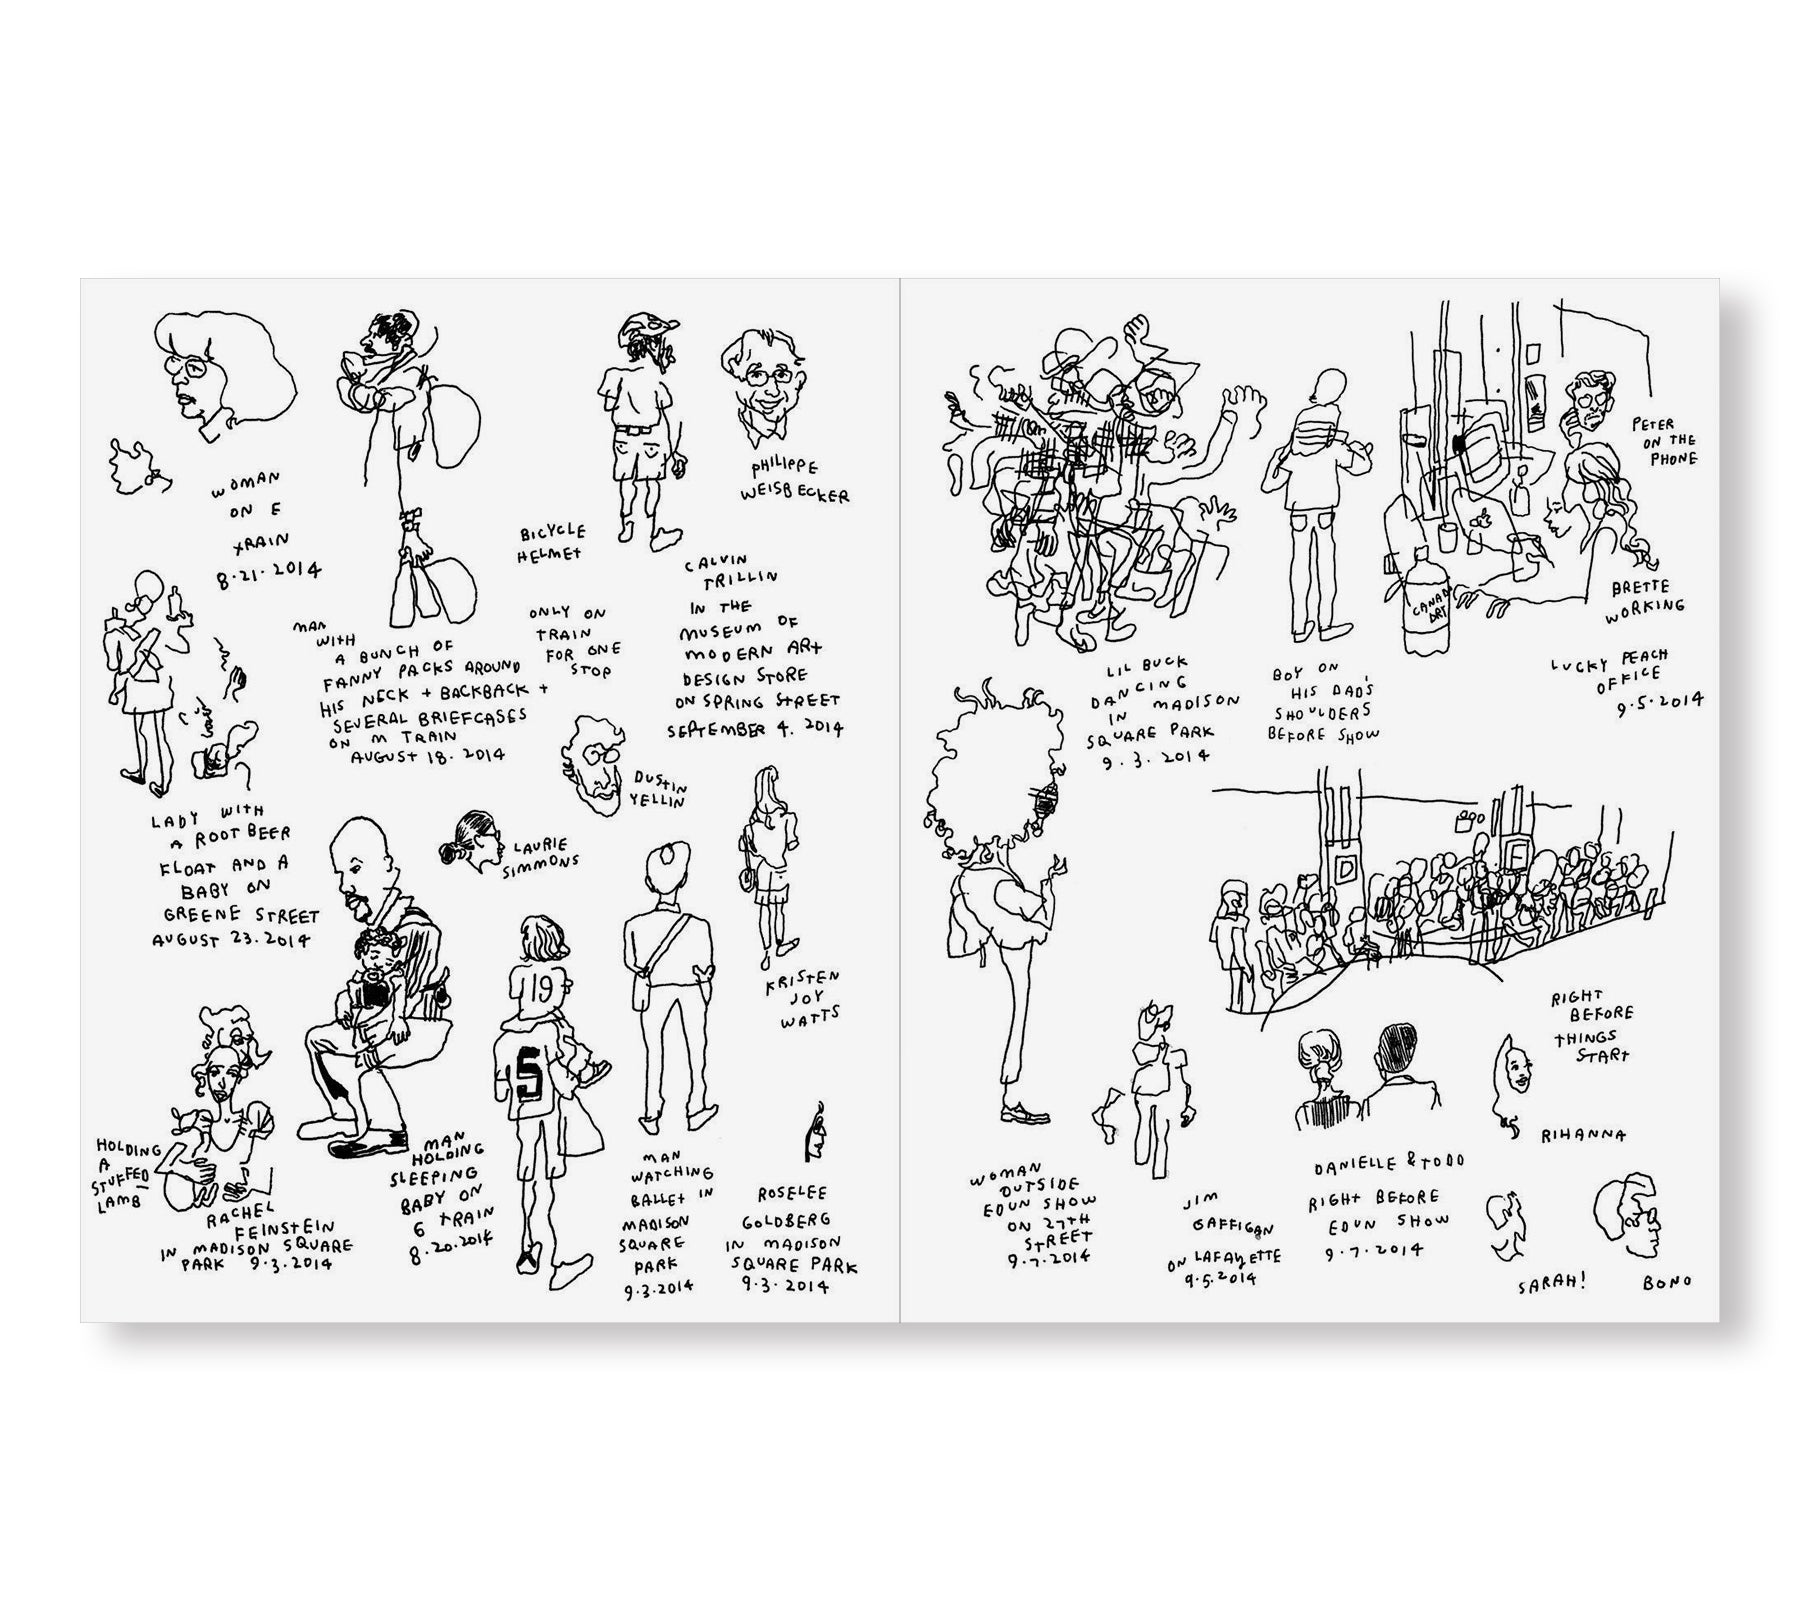 EVERY PERSON IN NEW YORK VOL 2 by Jason Polan